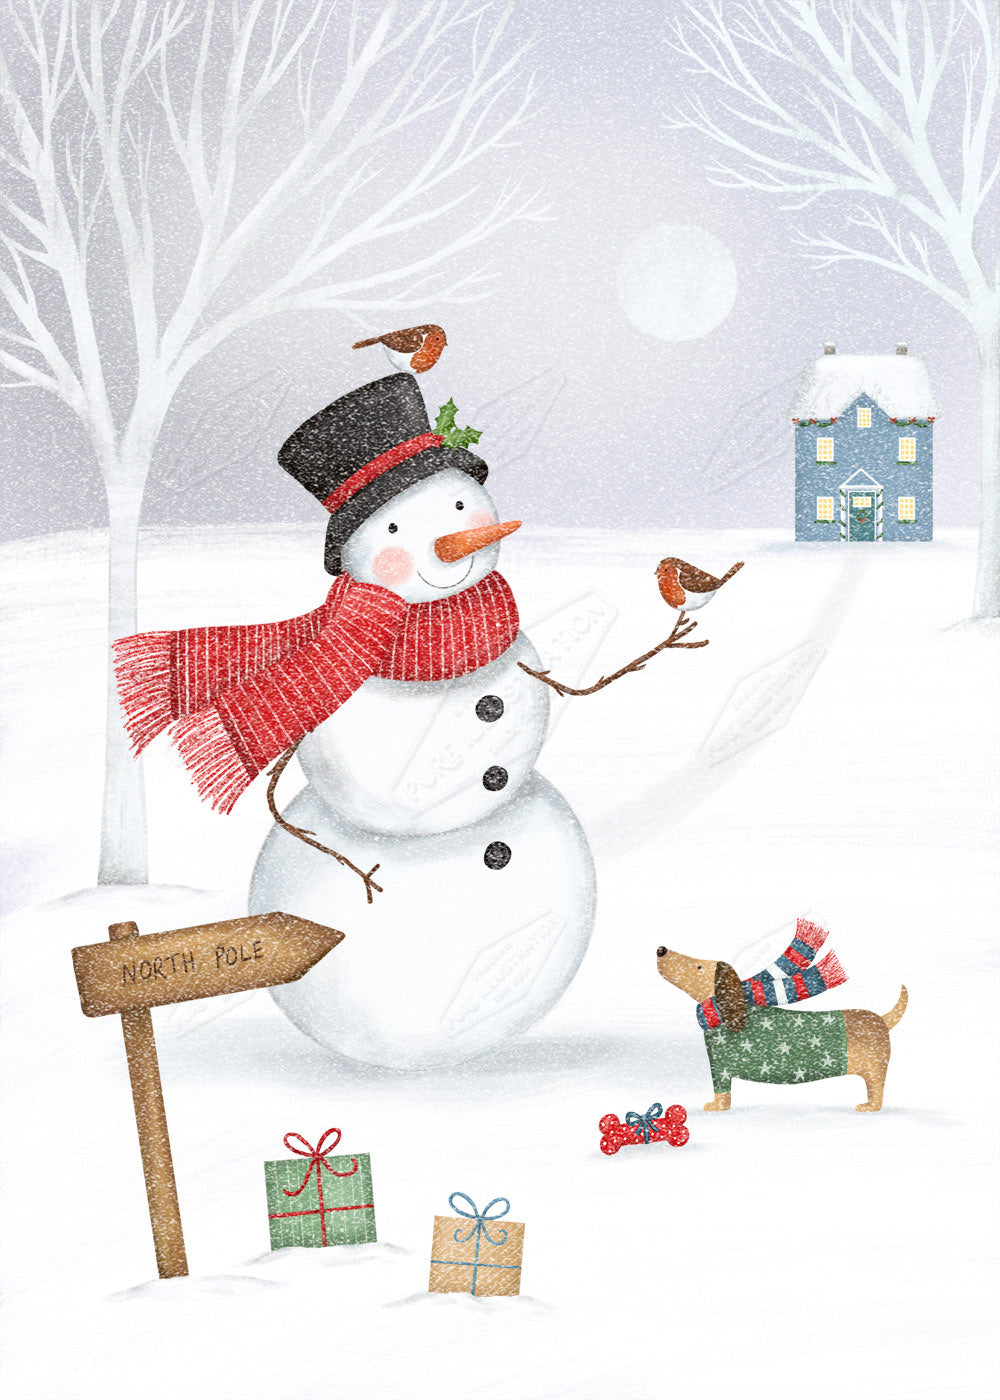 Snowy Snowy Snowman Illustration by Anna Aitken for Pure Art Licensing Agency & Surface Design Studio